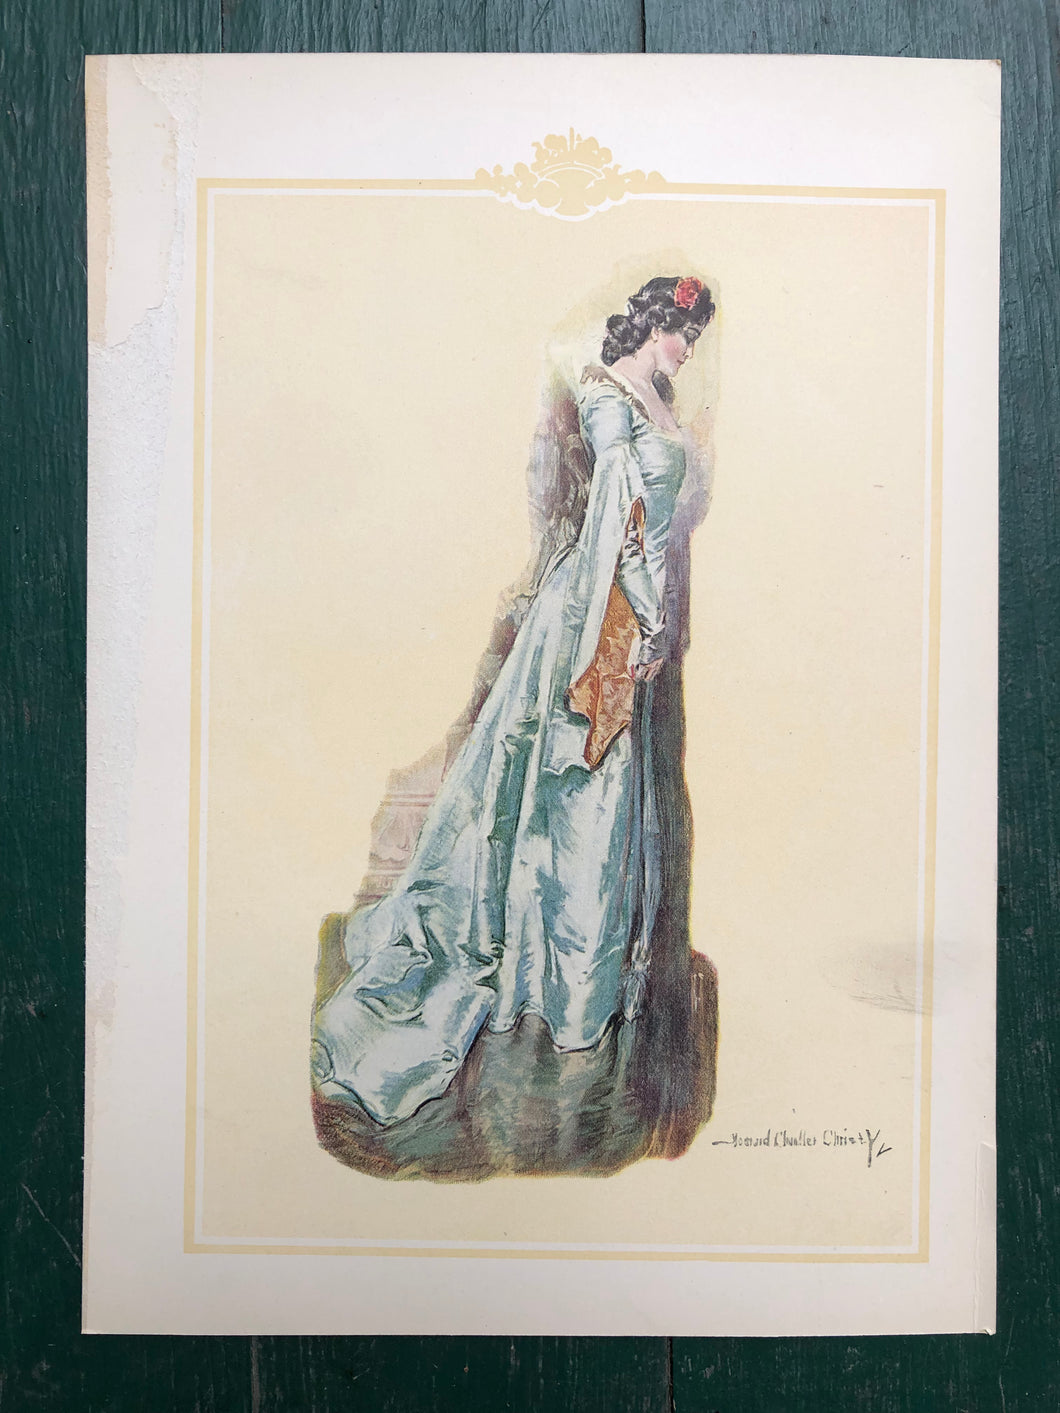 Print from “The Christy Girl” drawn by Howard Chandler Christy